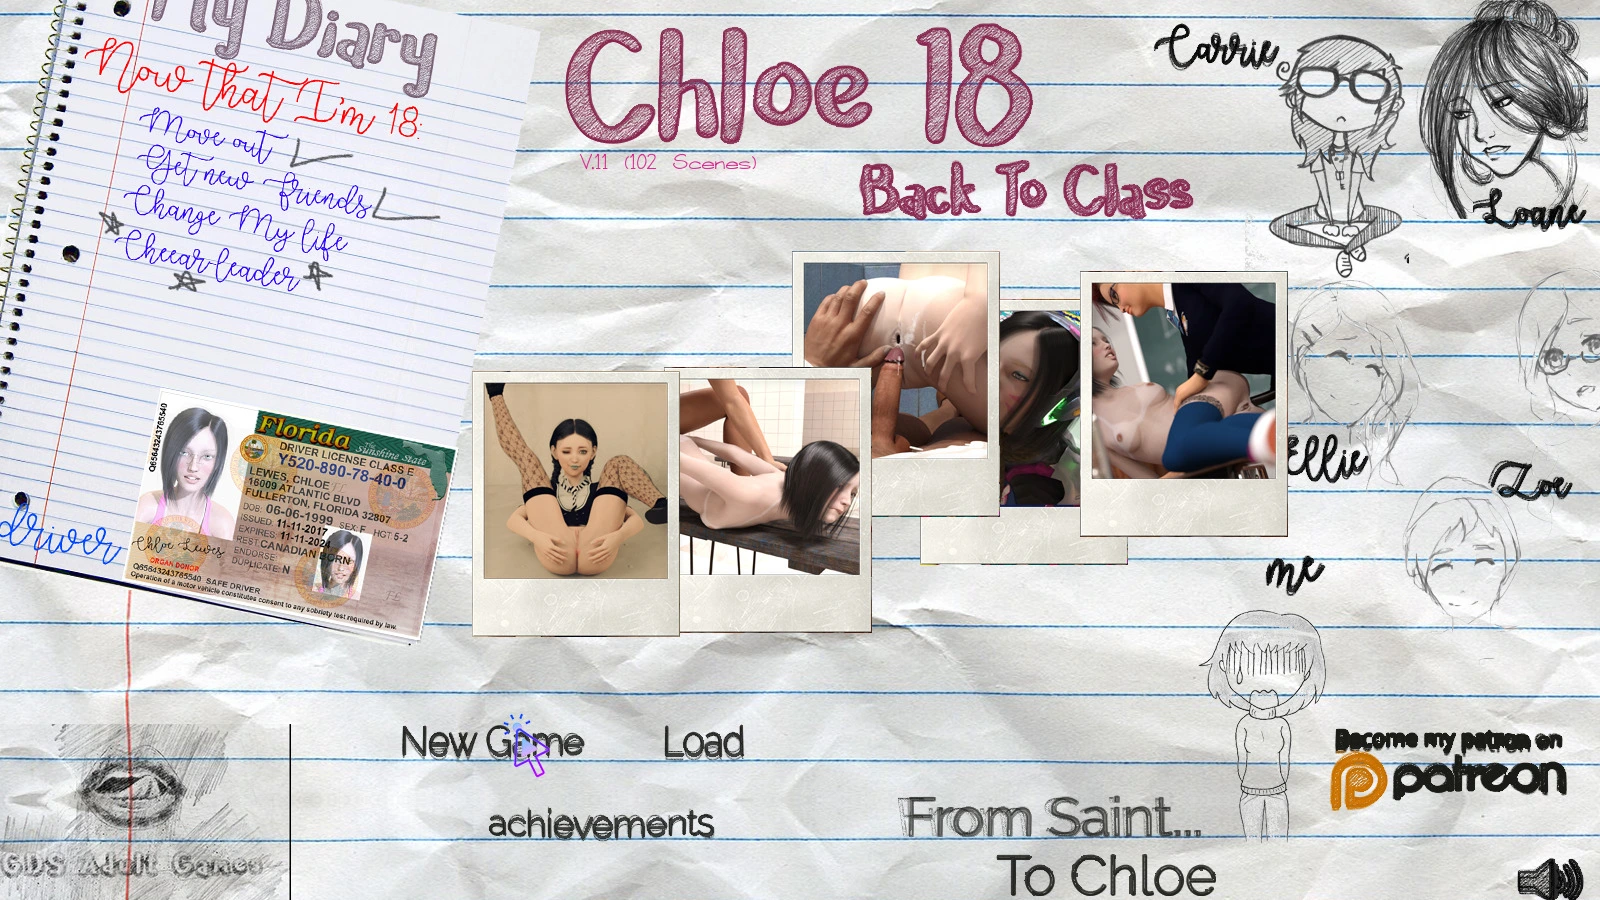 Chloe18 - Back To Class [v40.1 Holiday Update] main image